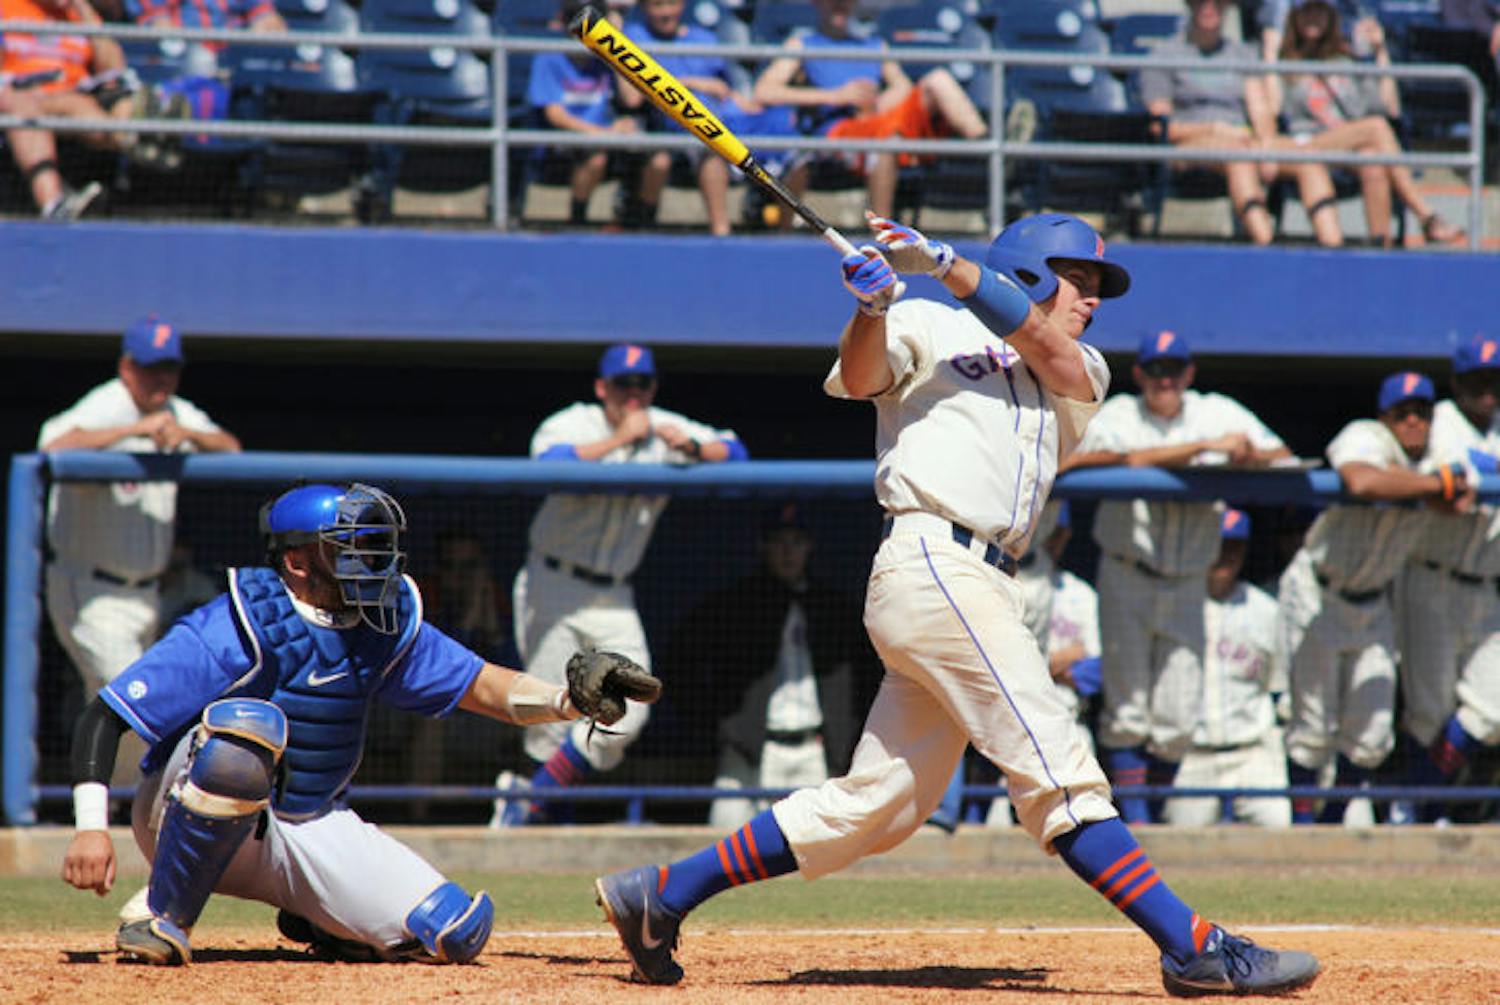 Catcher Taylor Gushue (17) swings during Florida’s 11-5 loss to Kentucky on March 16 at McKethan Stadium. Gushue finished the game 1 for 4 at the plate.